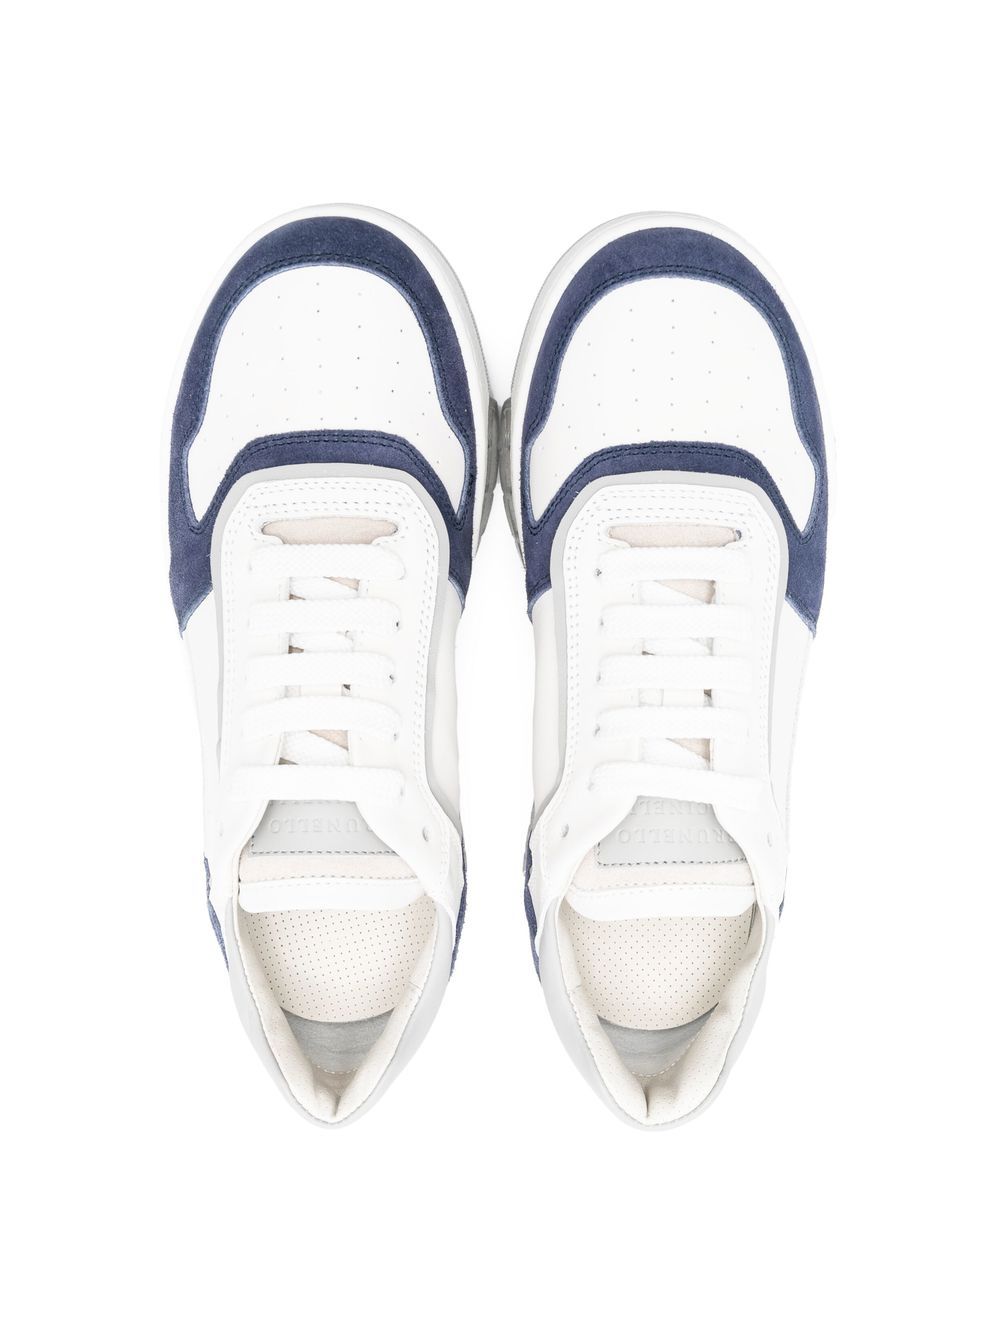 Brunello Cucinelli Lace-Up Sneakers - Navy - 44